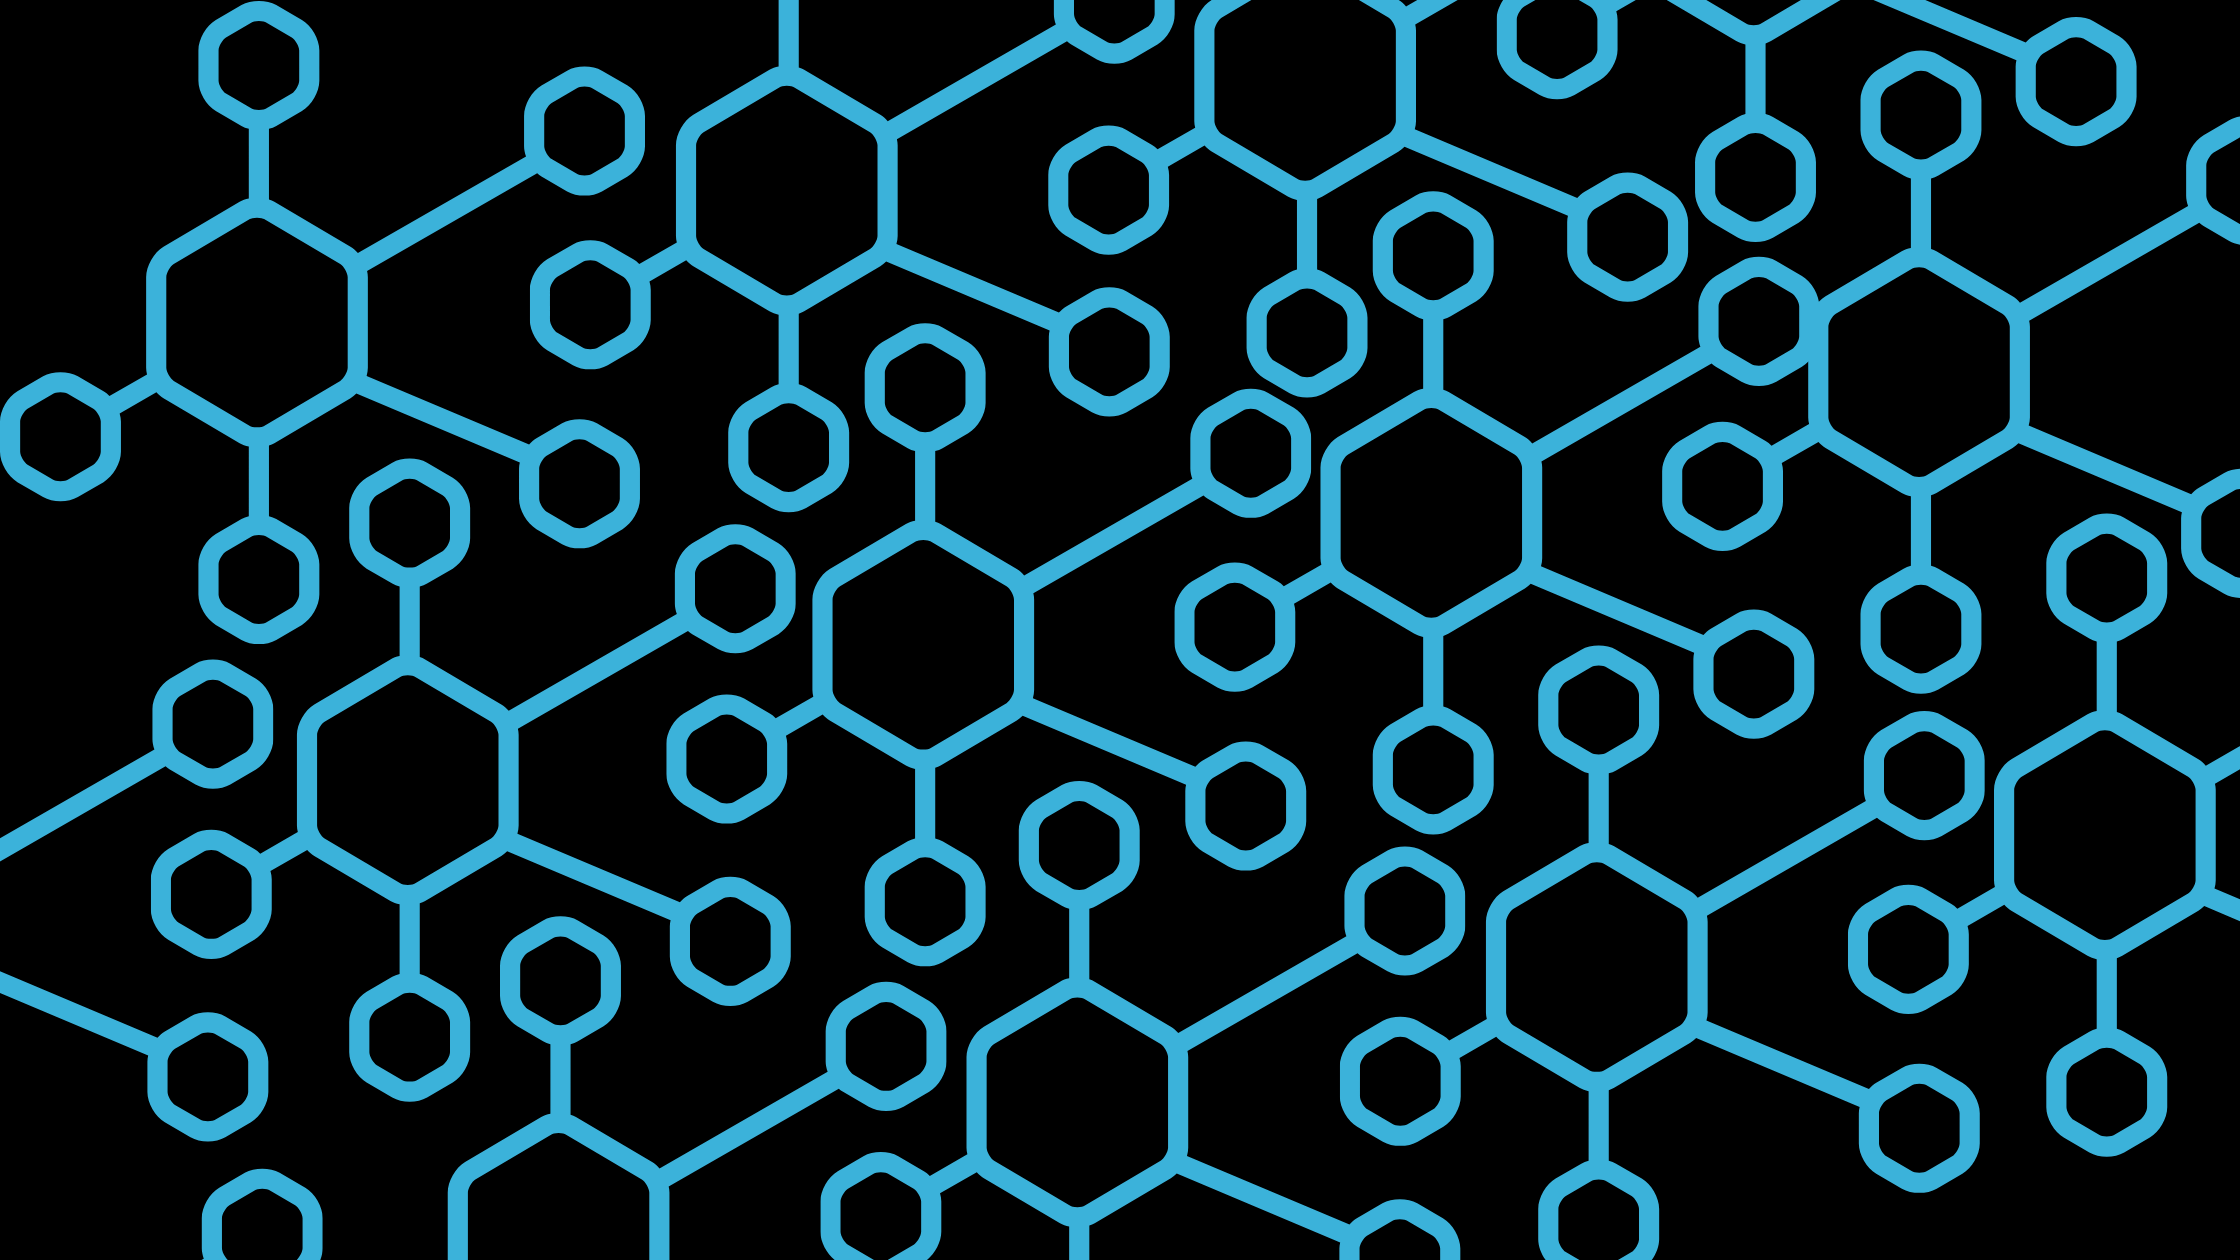 A series of hexagons connected by lines